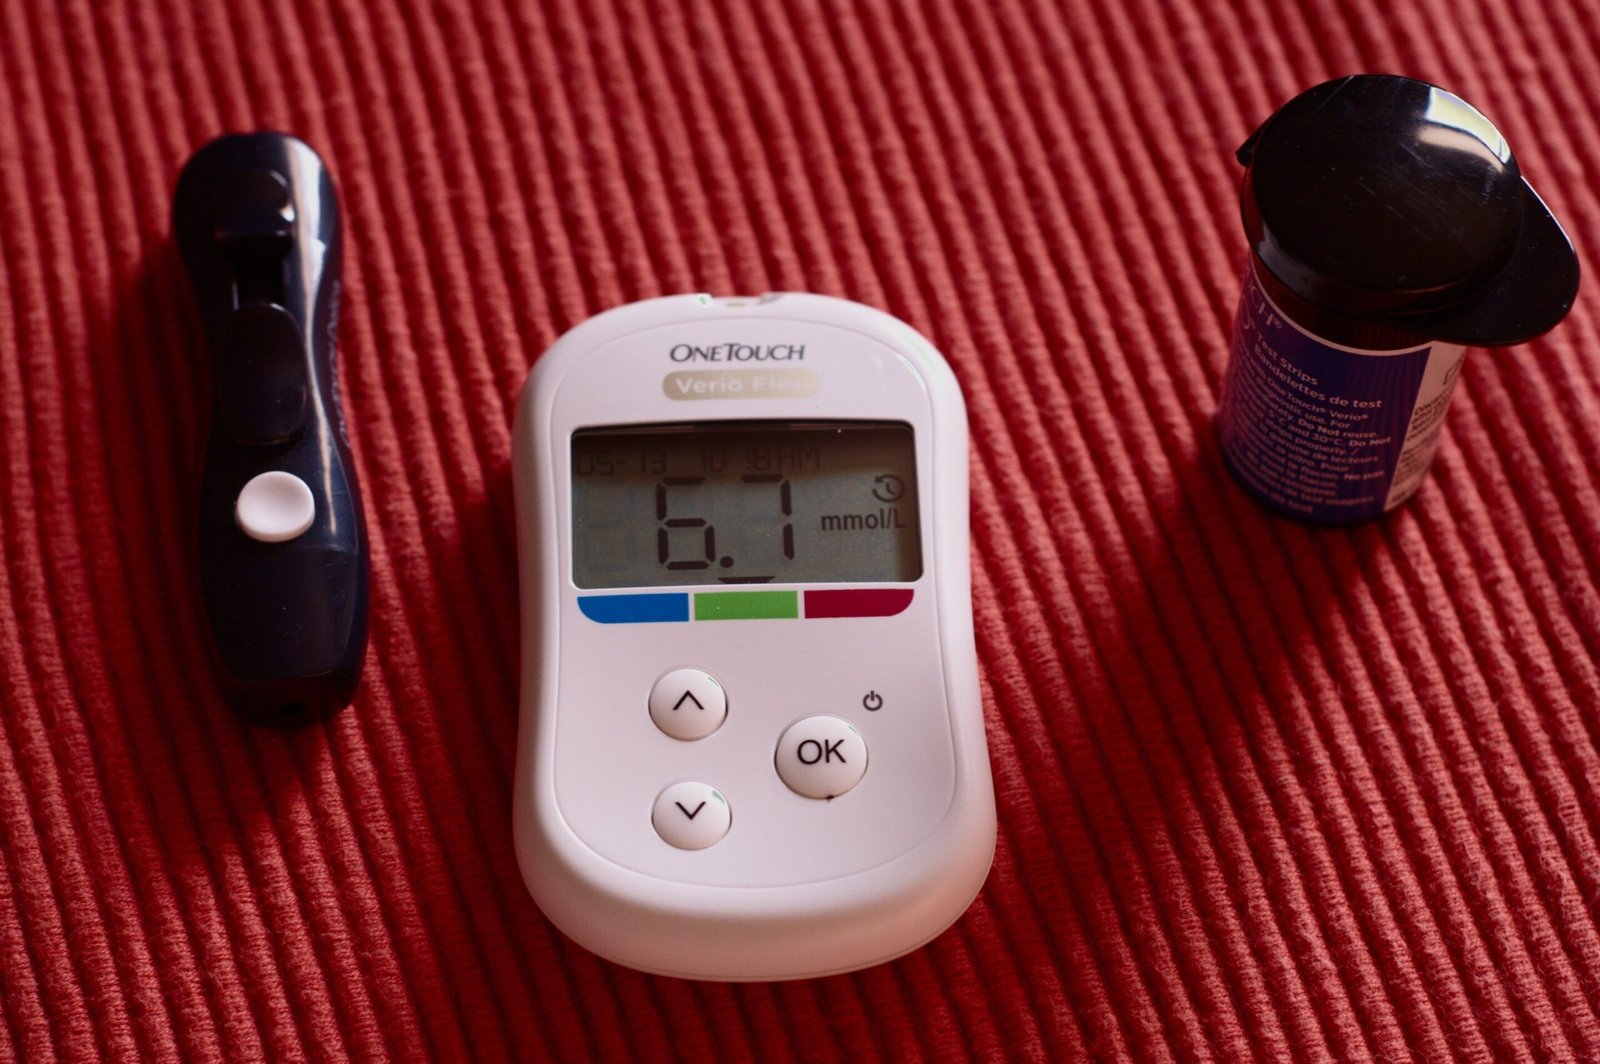 Use of glucose monitors by people not living with diabetes needs more regulation